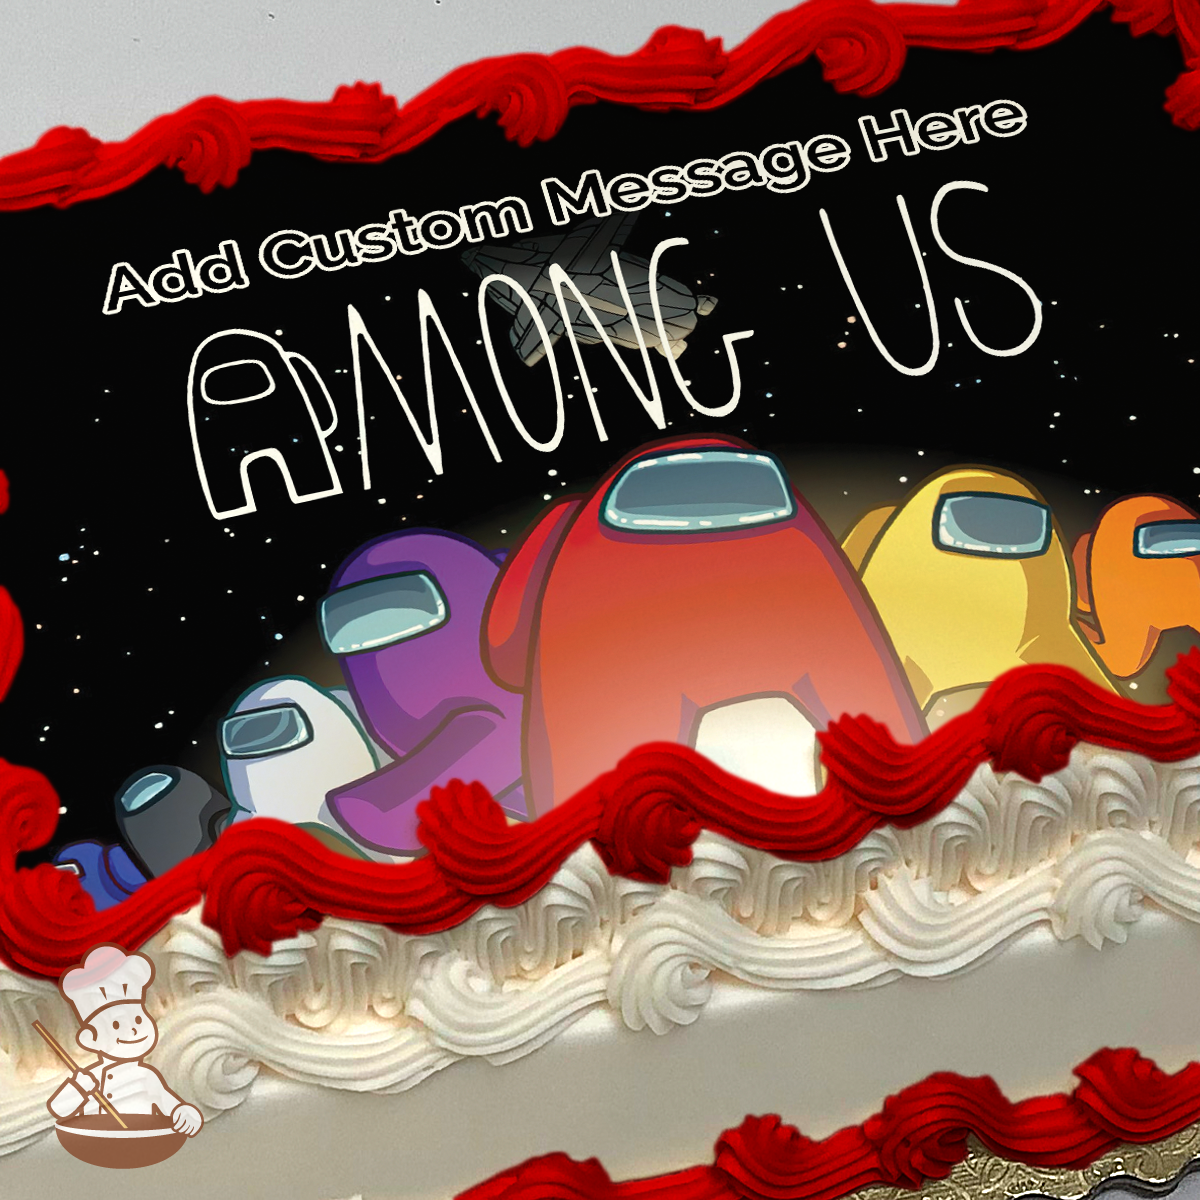 Character from Among Us in space printed on extra cake layer and decorated on sheet cake.